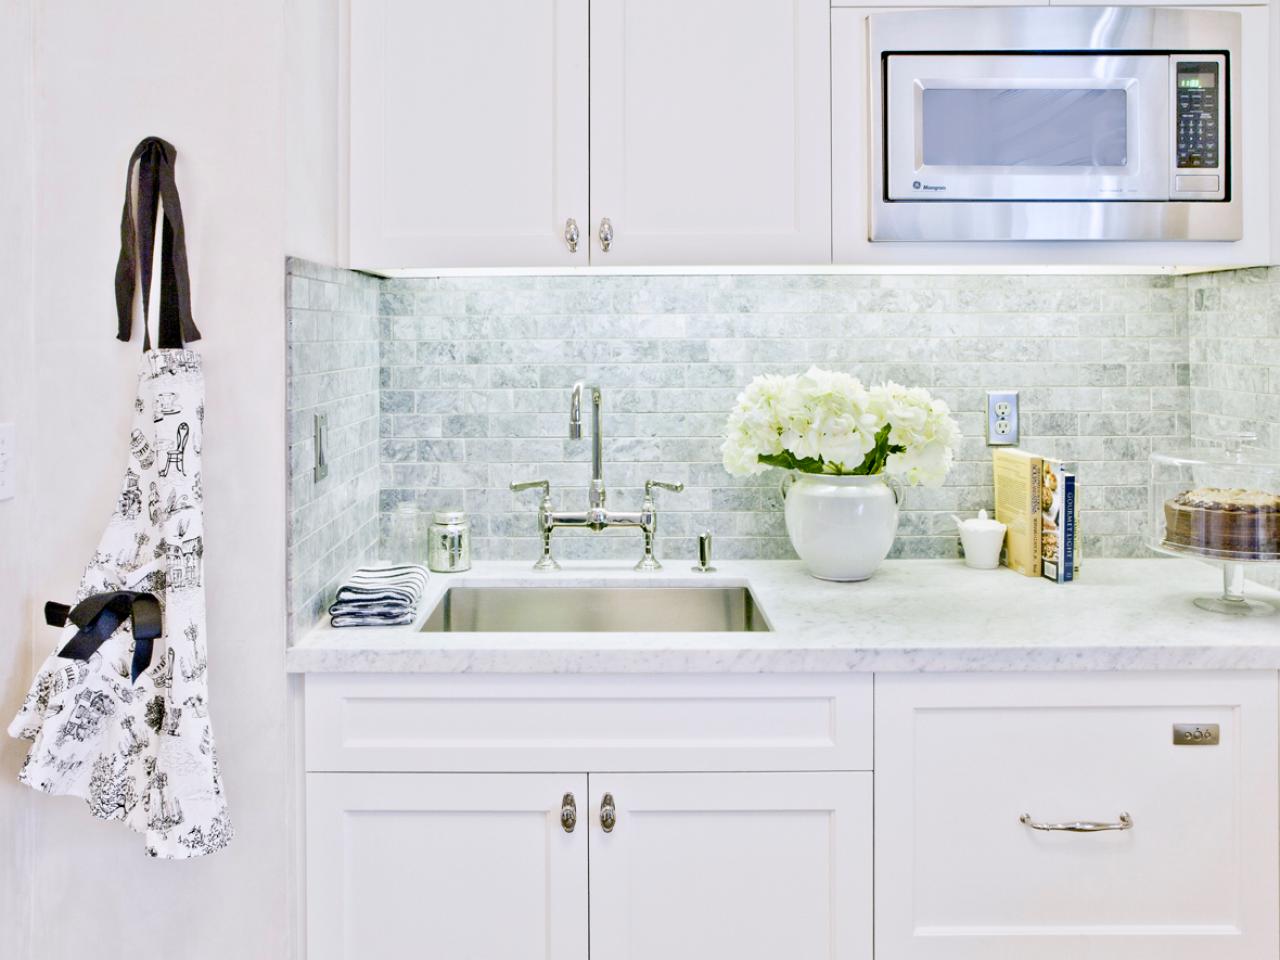 Ideas For Styling Your Kitchen Counters   HGTV's Decorating ...